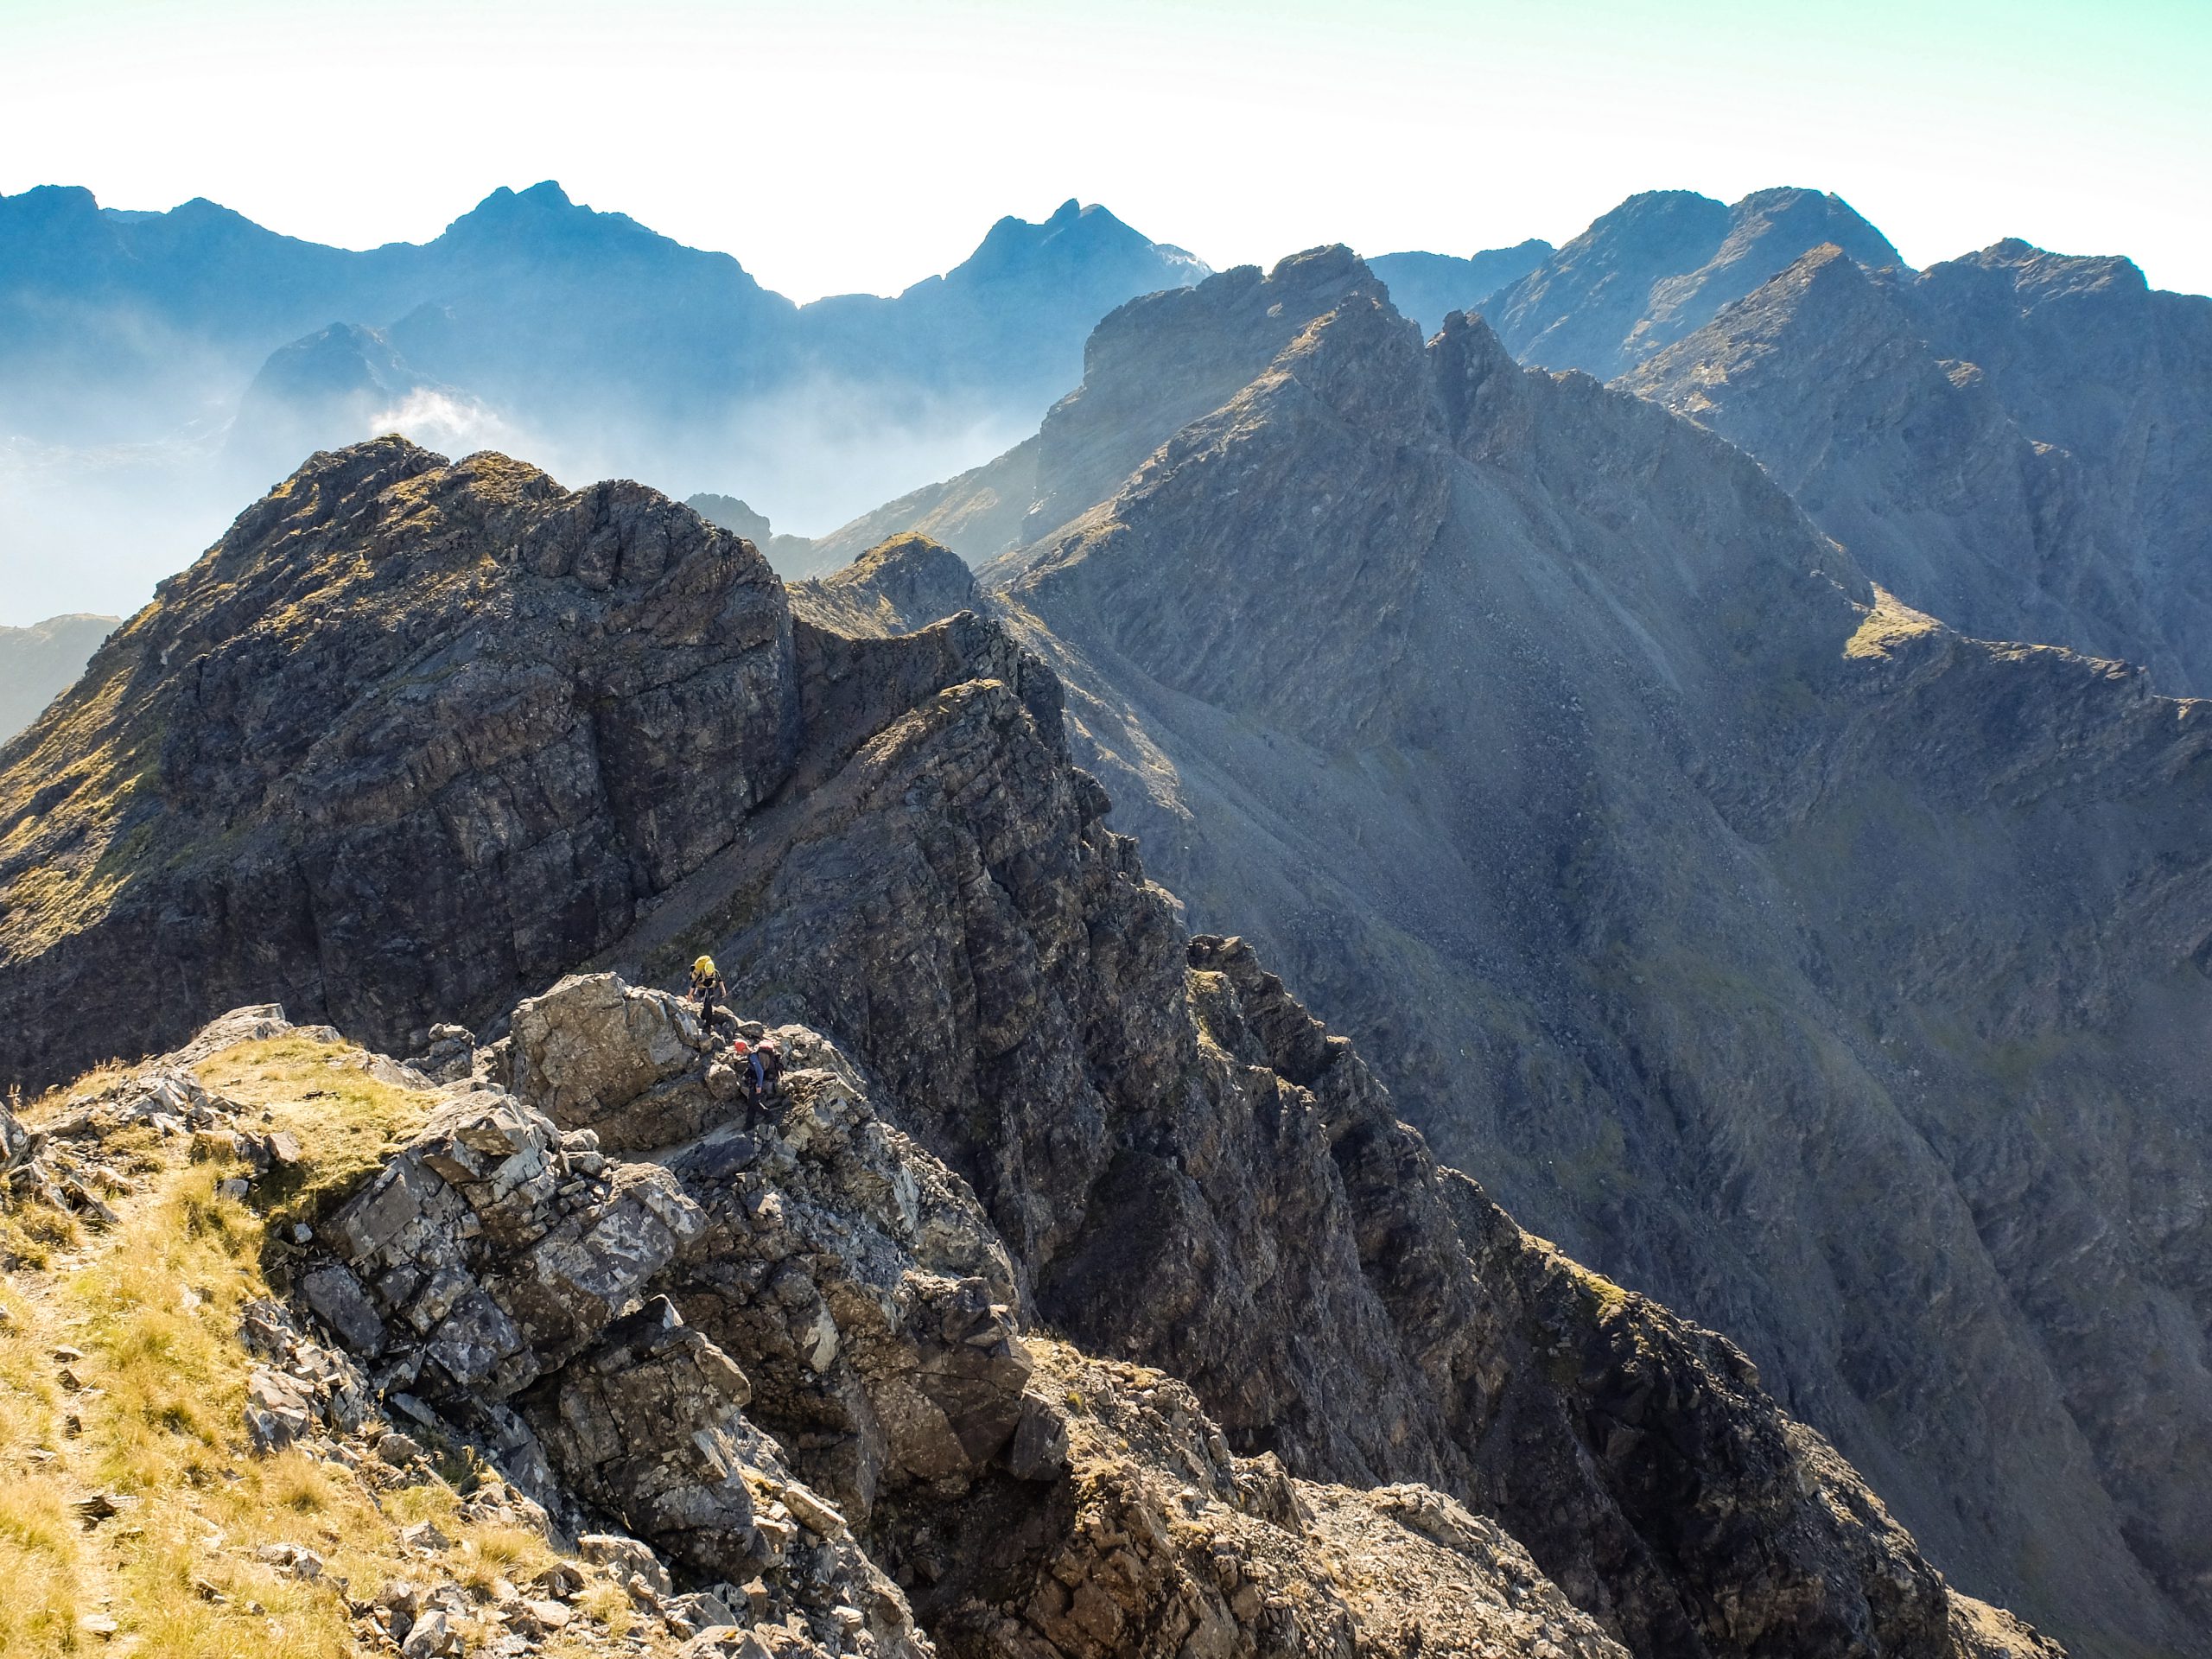 Scrambling after An Caisteal while on a Cuillin Ridge Traverse